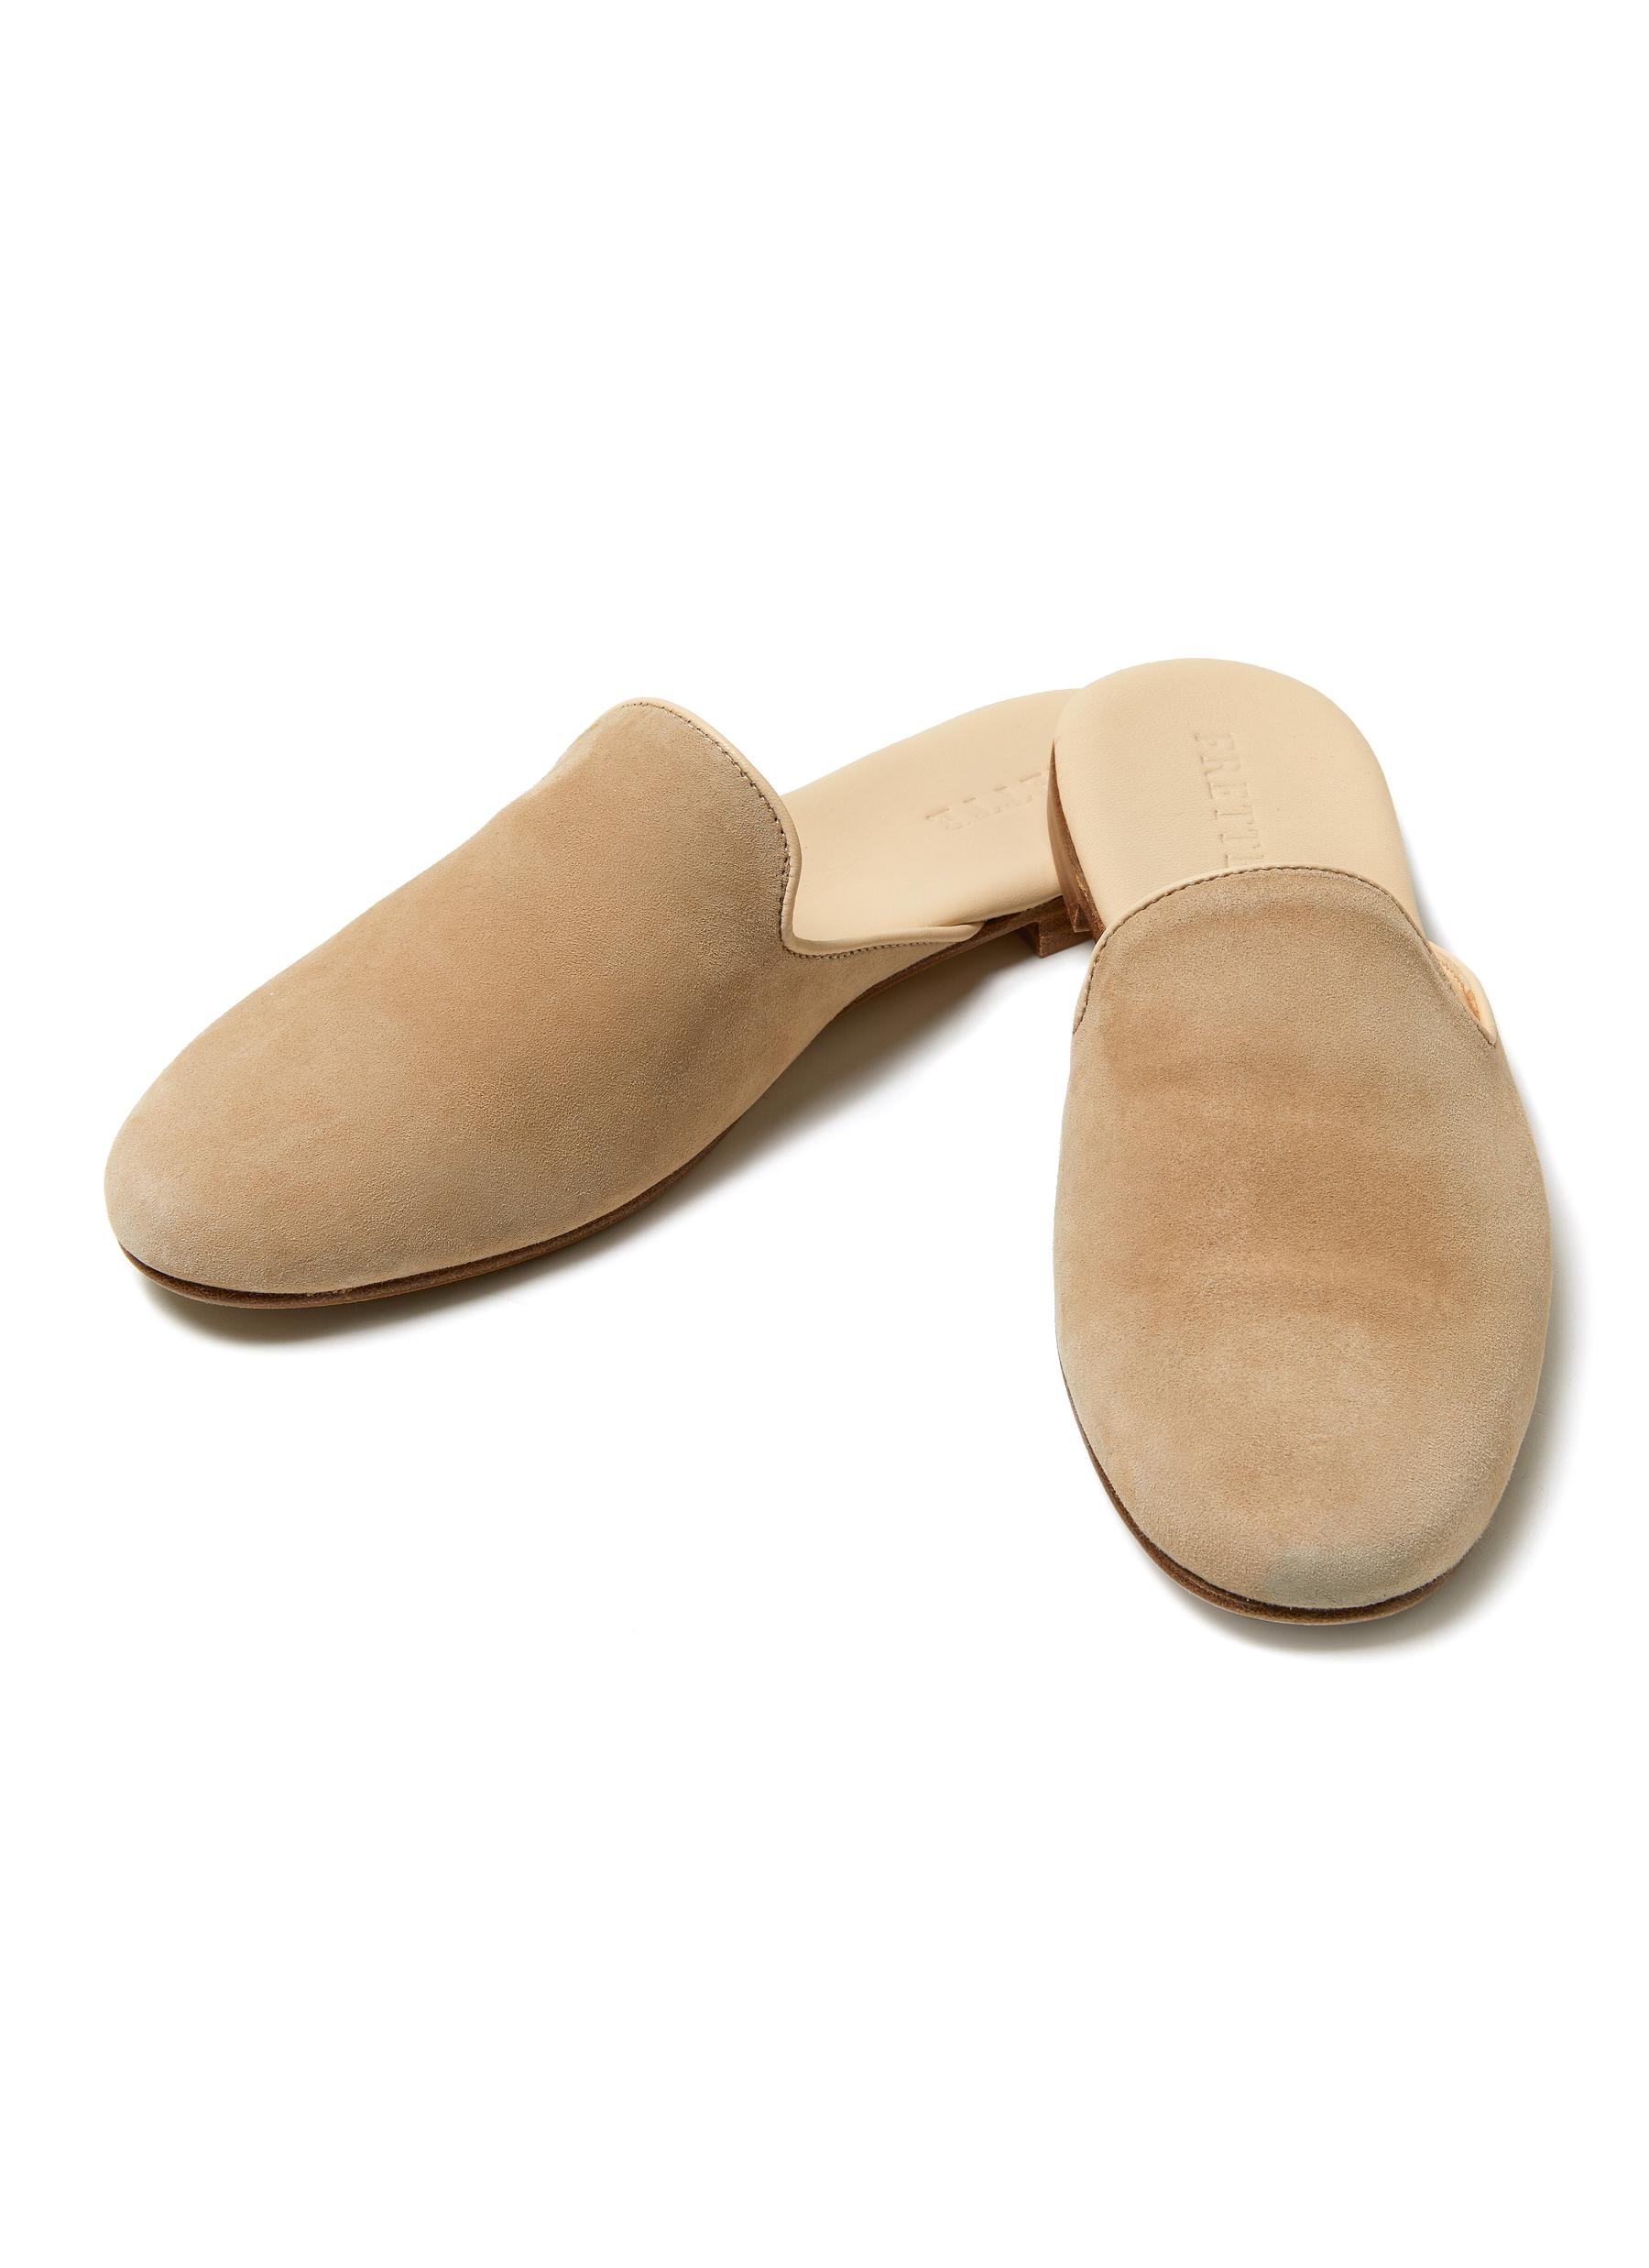 ASTORIA SUEDE OPEN-BACK SLIPPERS - SIZE 38